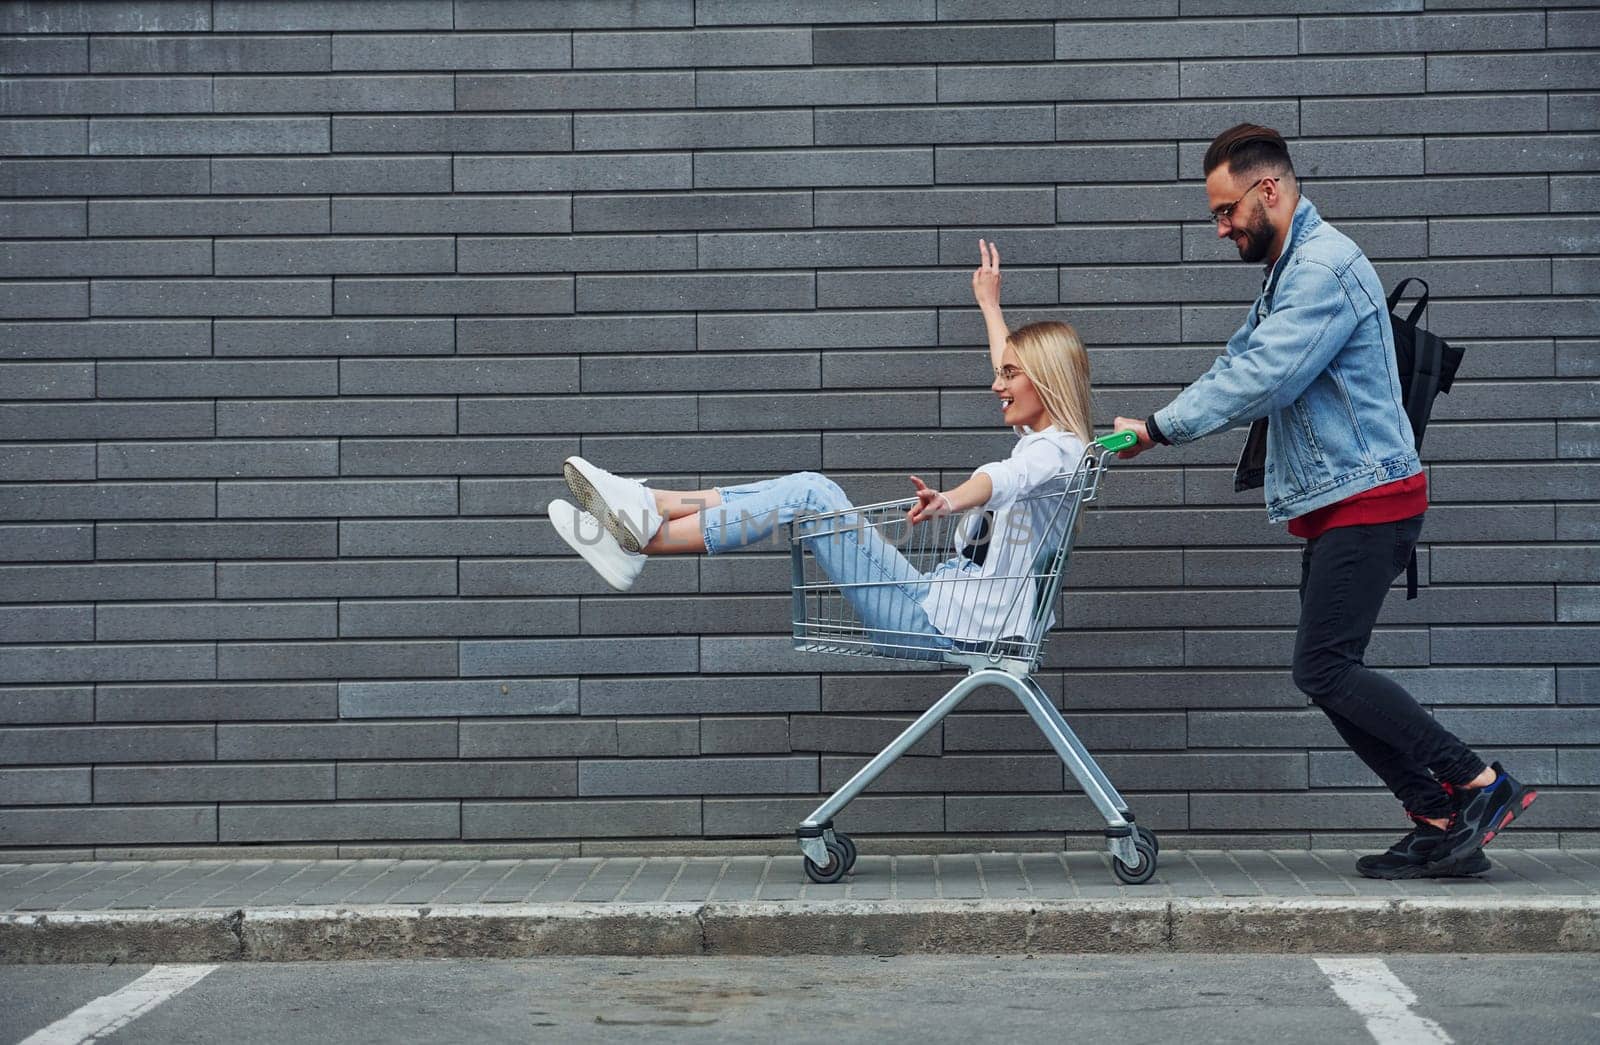 Having fun and riding shopping cart. Young stylish man with woman in casual clothes outdoors together. Conception of friendship or relationships.